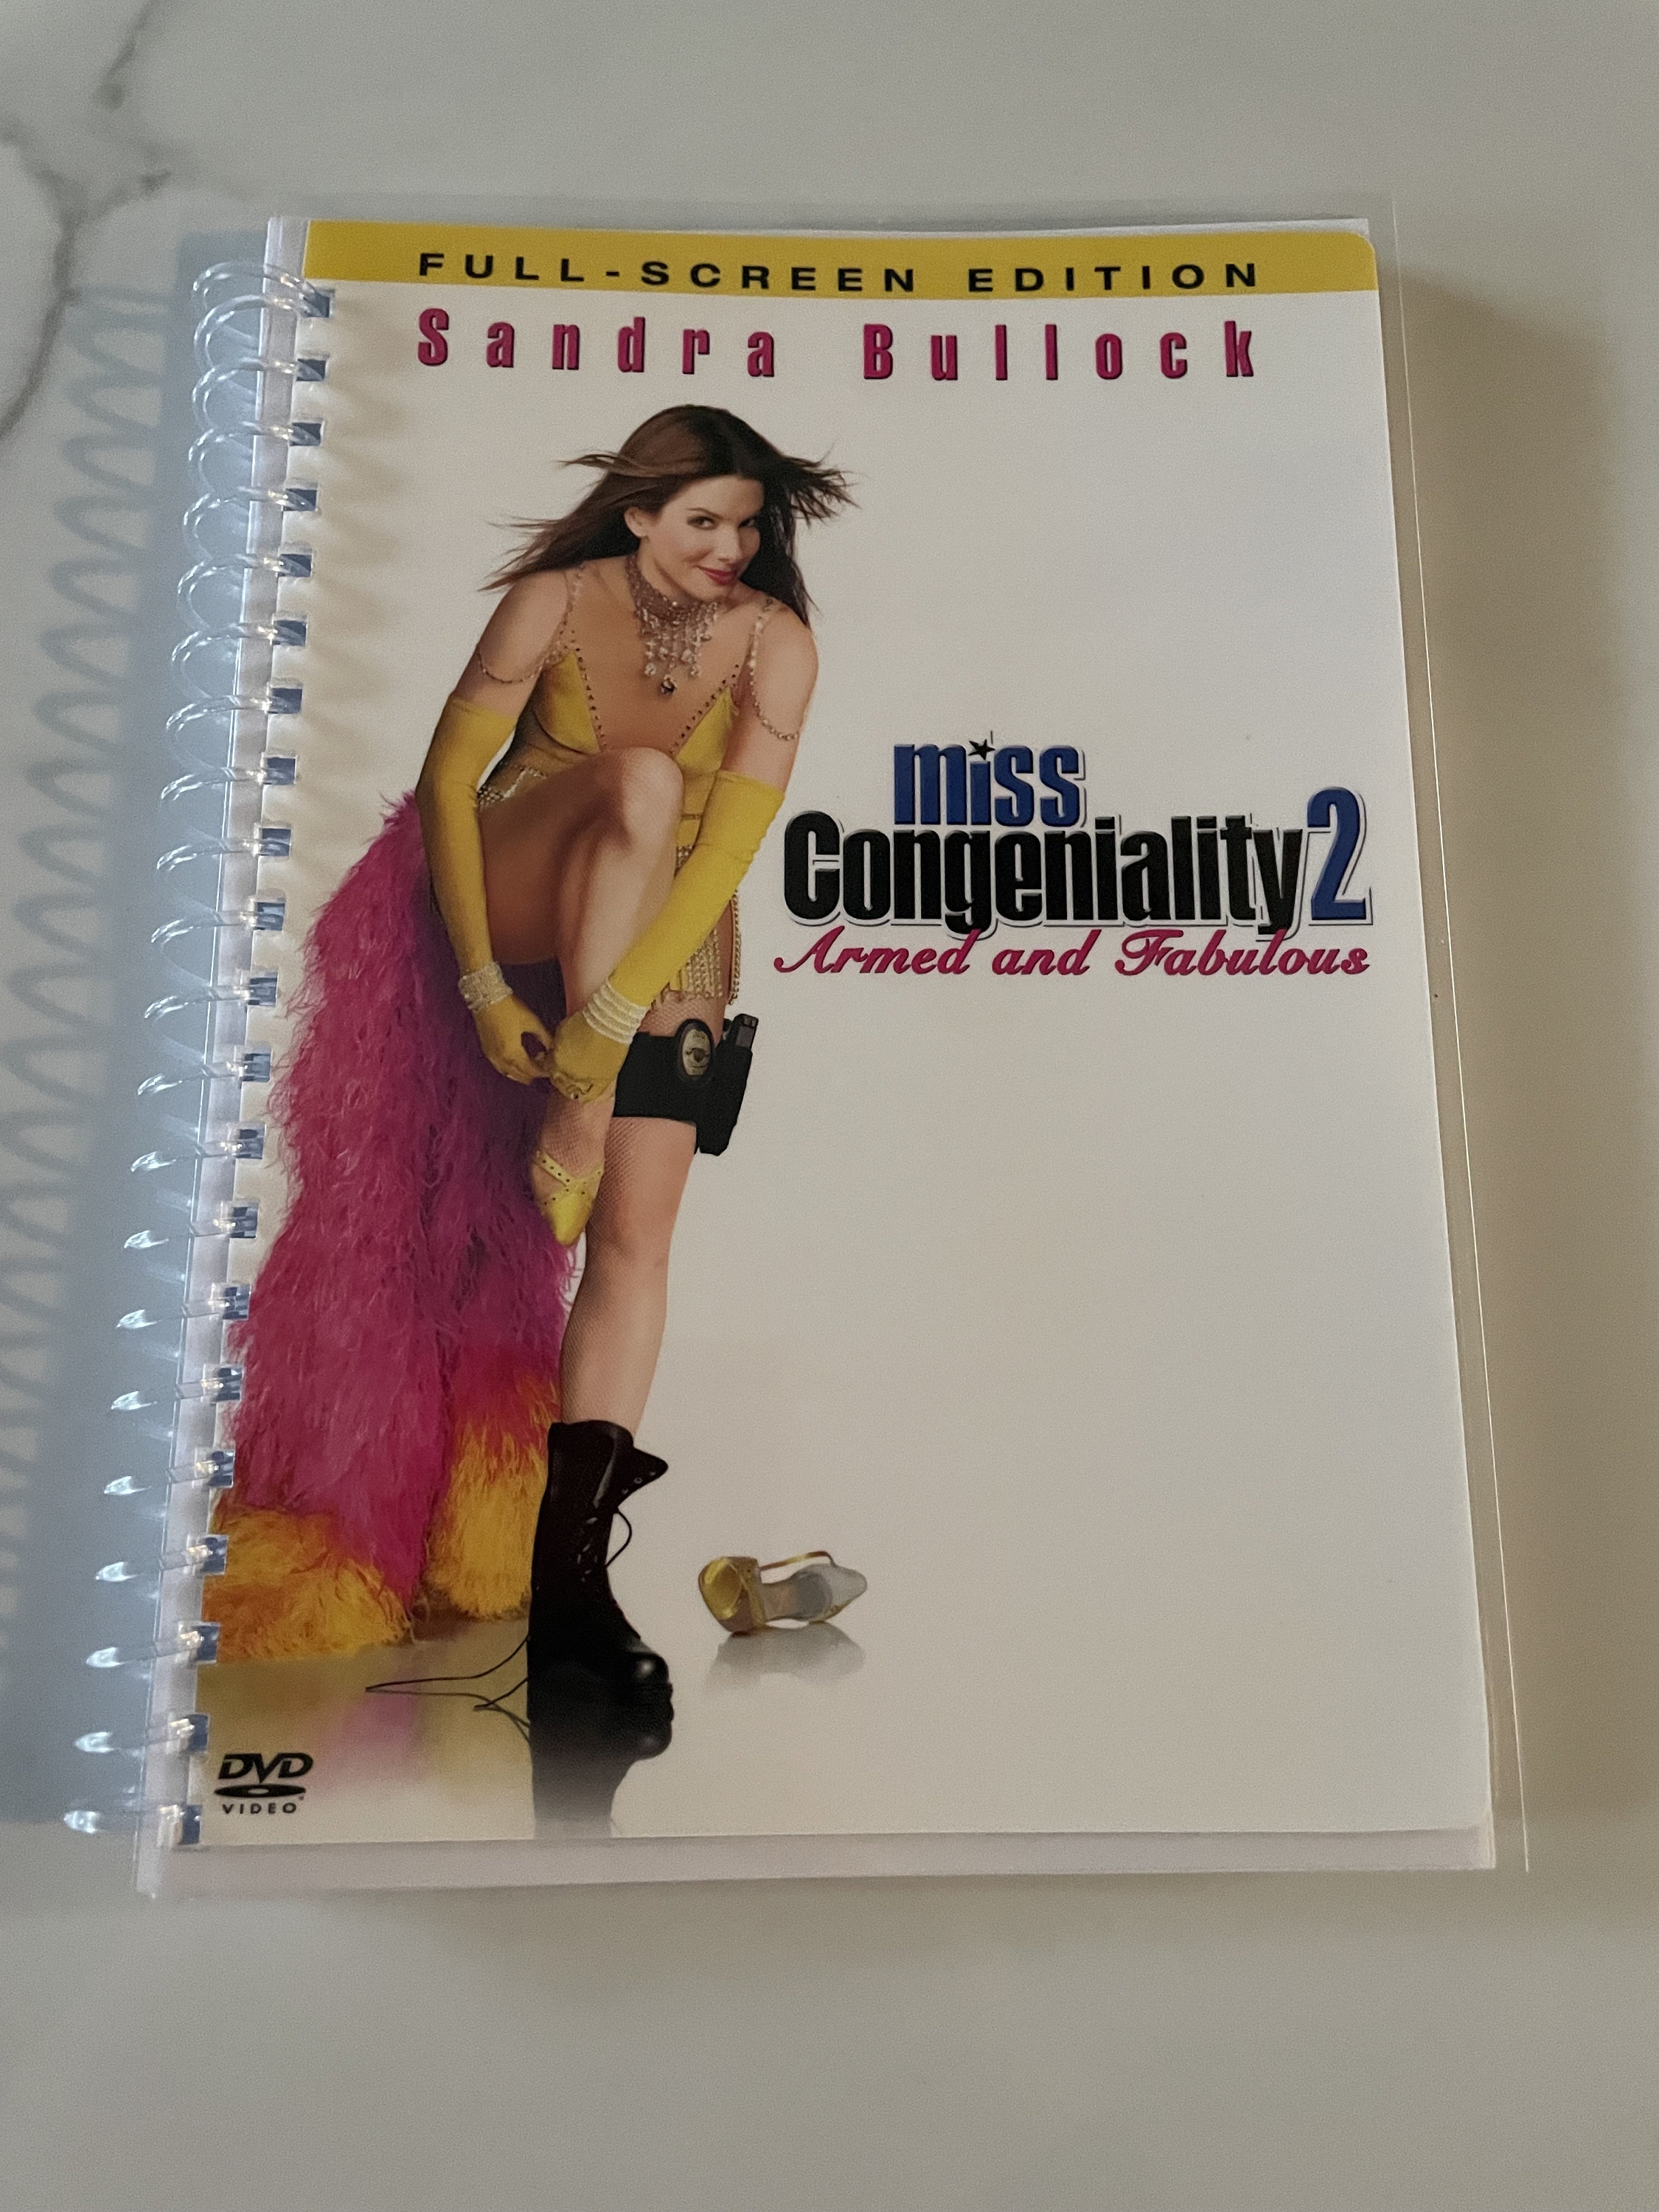  Armed and Fabulous Sandra Bullock 3 movie Bundle - Miss  Congeniality/ Miss Congeniality 2 & Hope Floats 3-DVD Collection : Movies &  TV